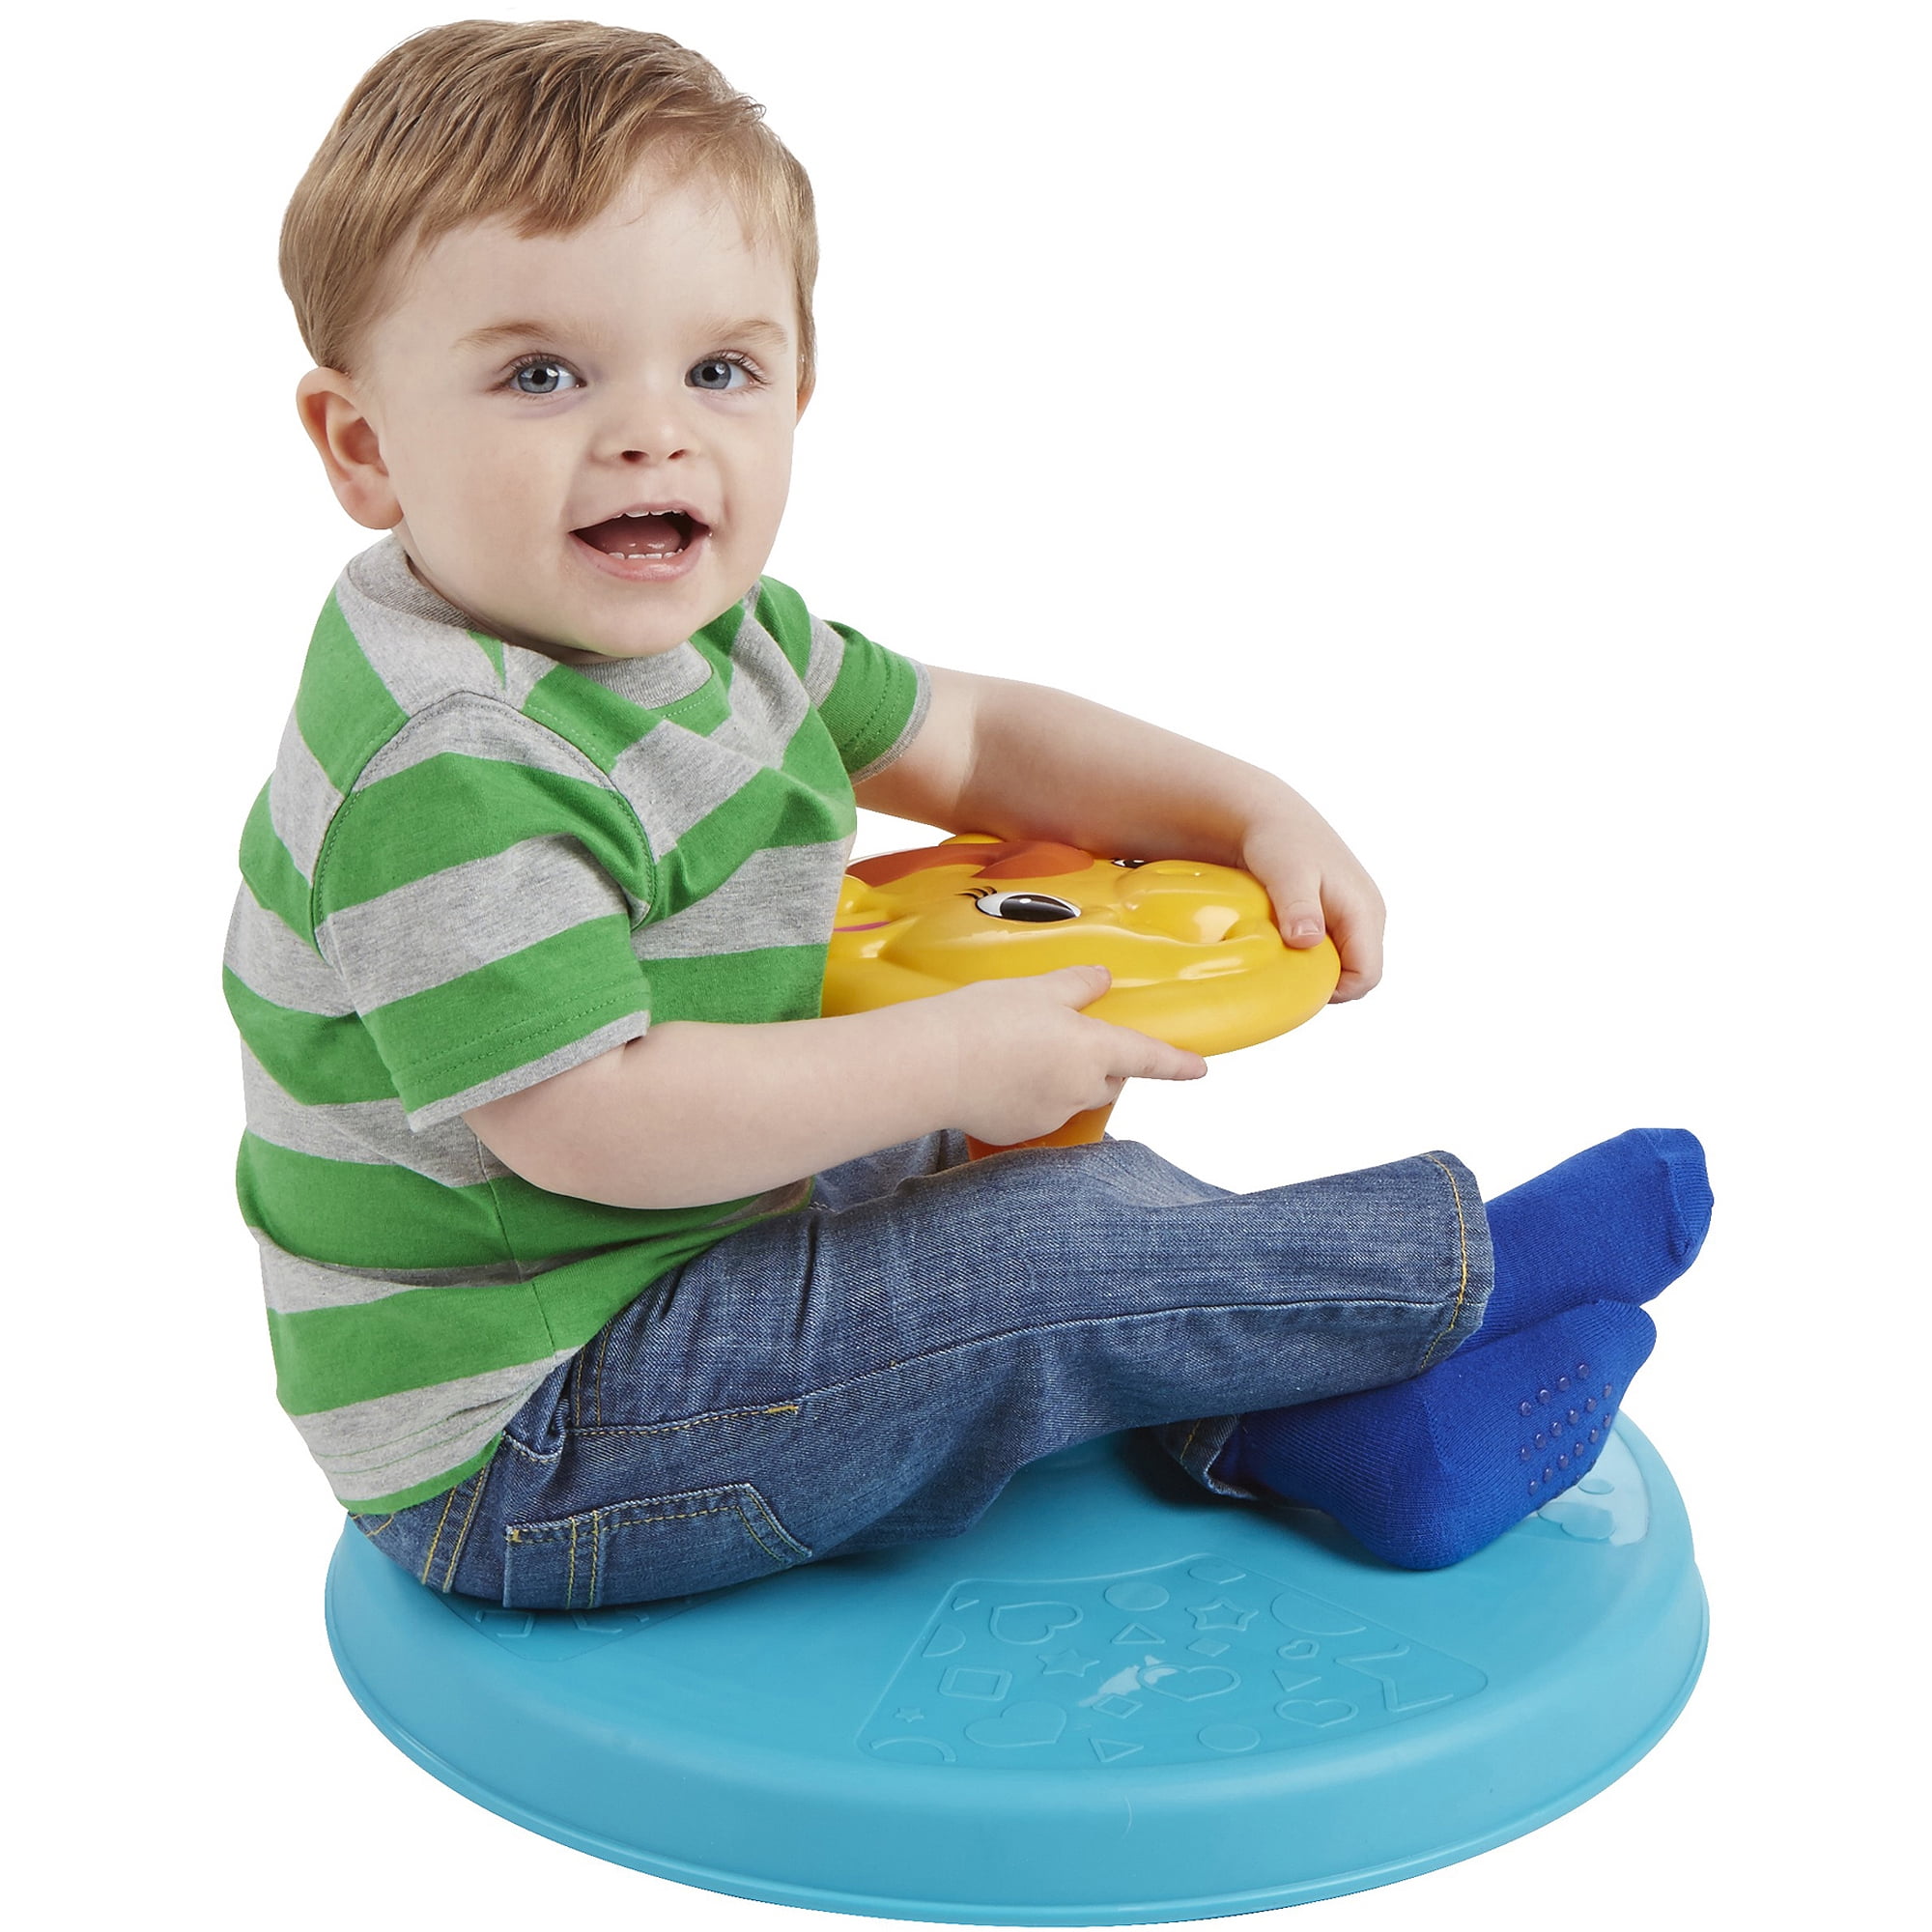 spinning toy for babies